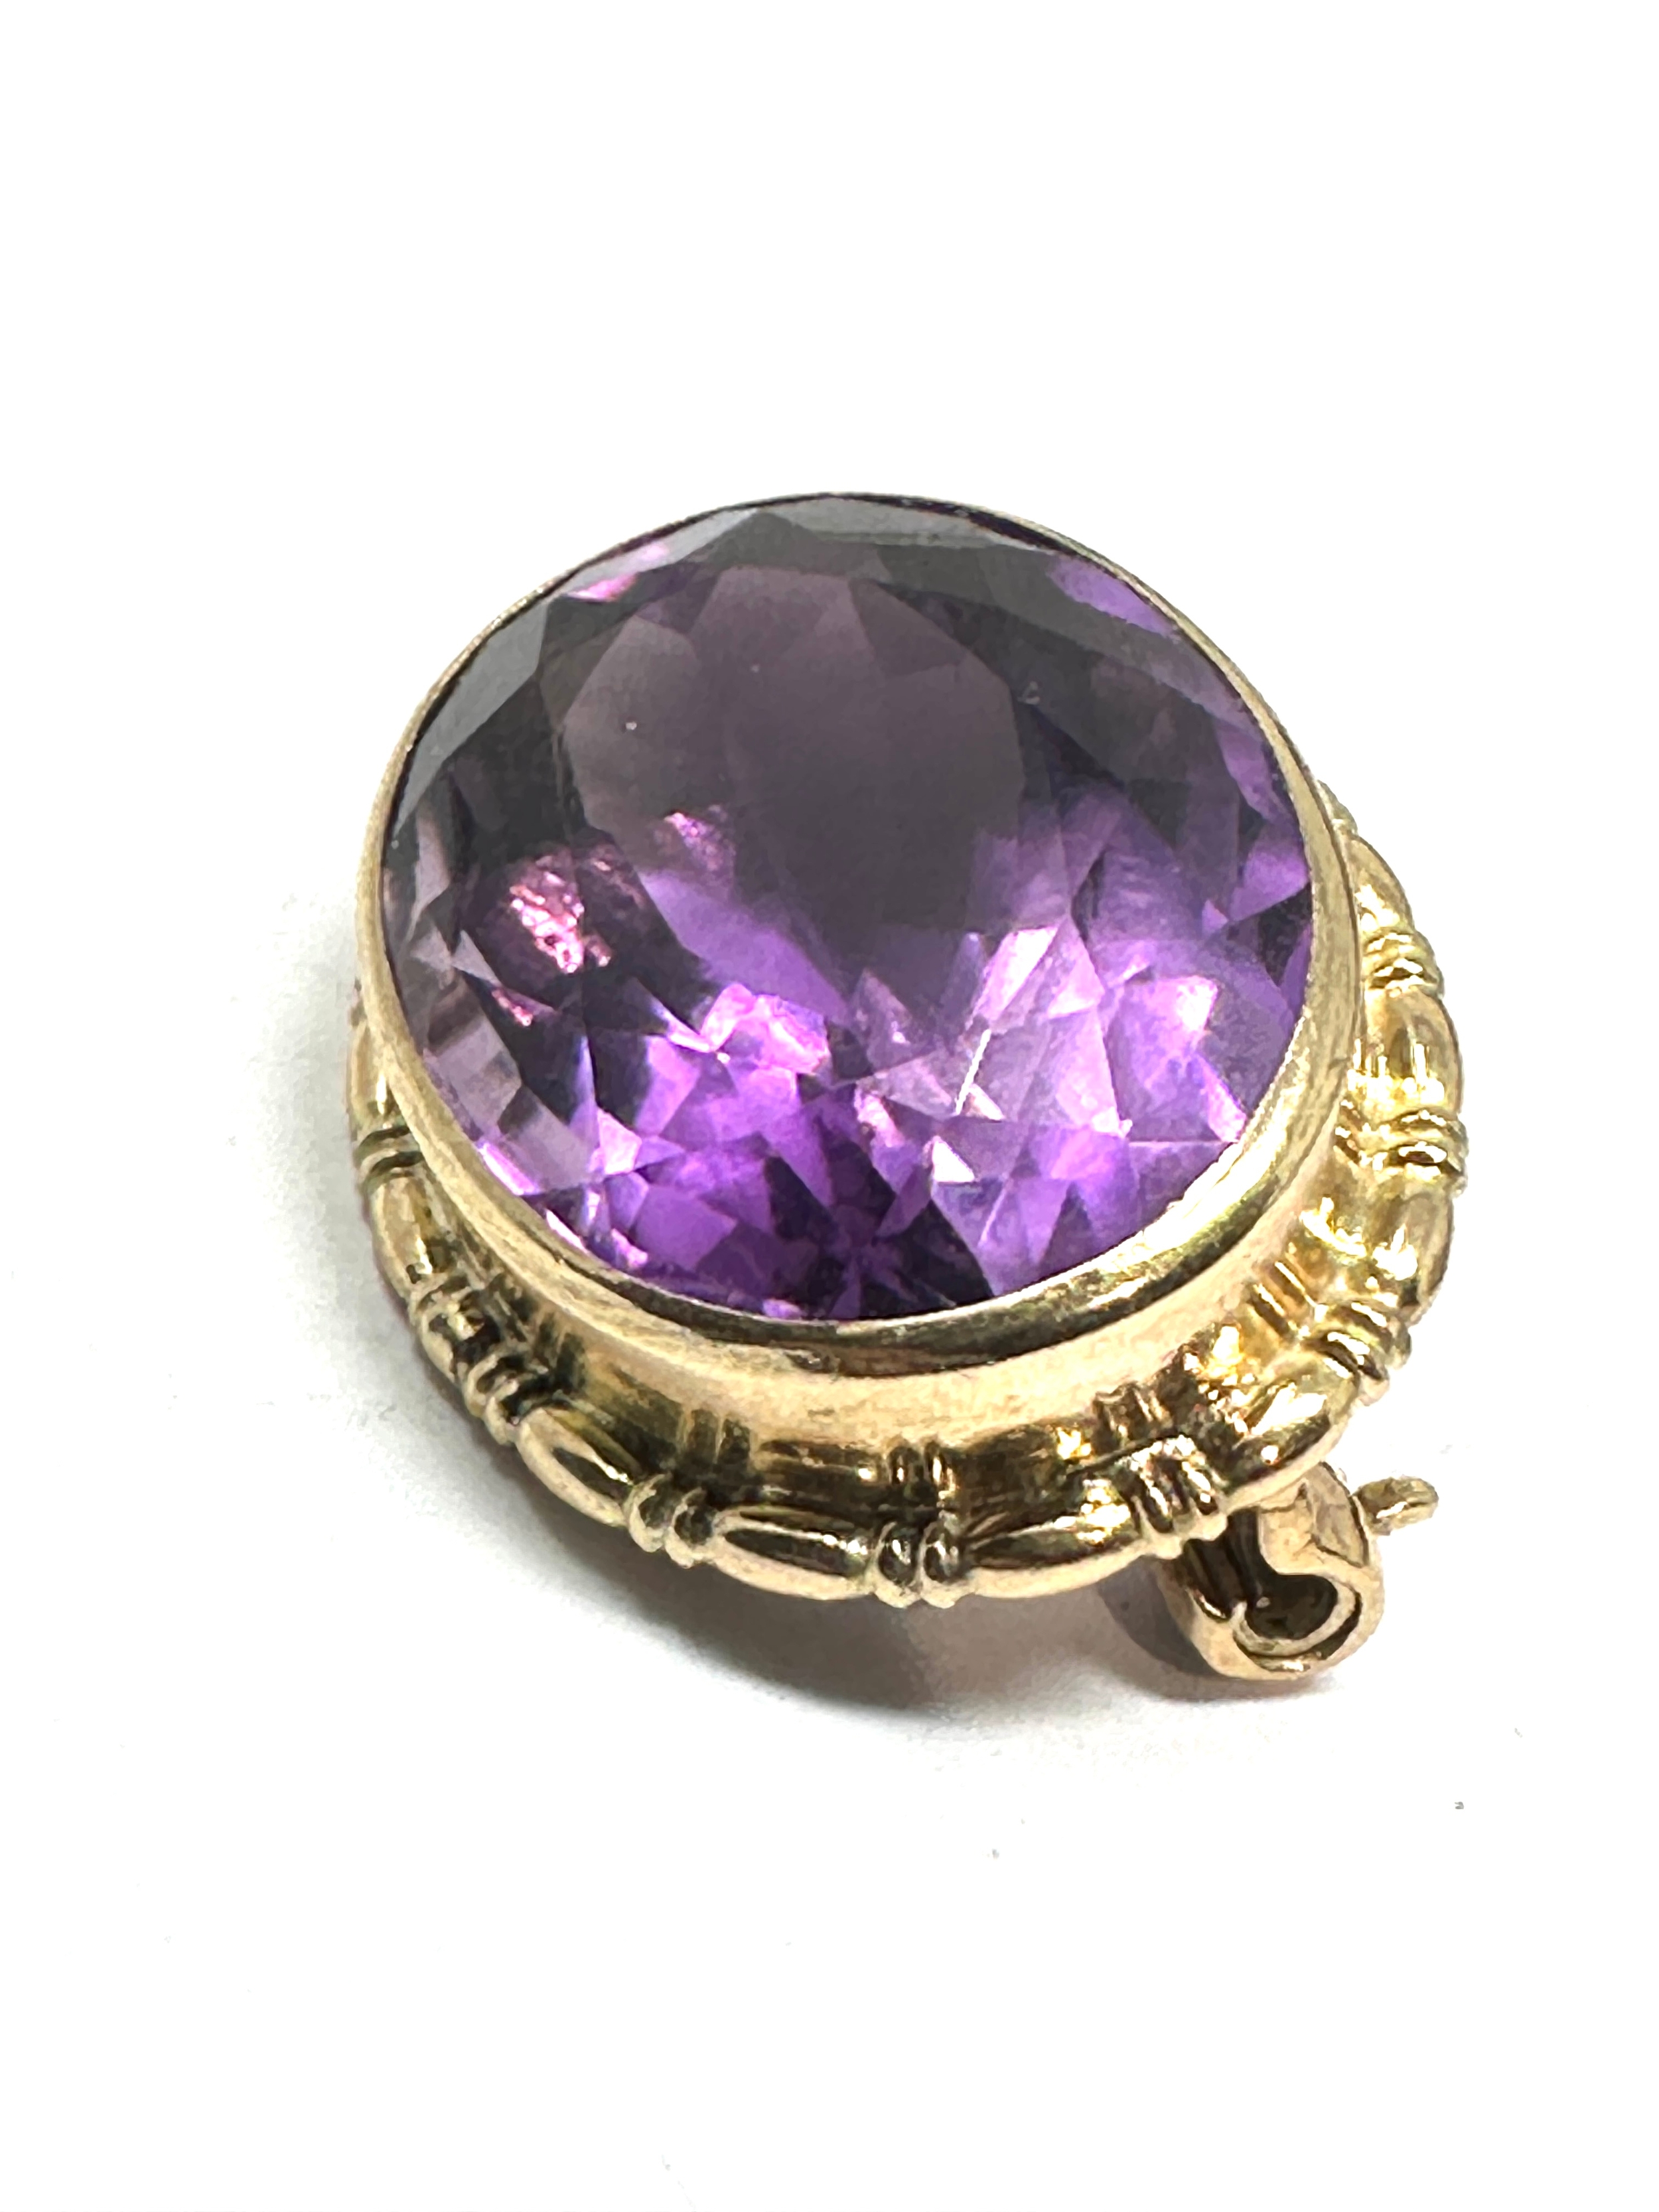 9ct gold amethyst brooch weight 9.8g - Image 2 of 3